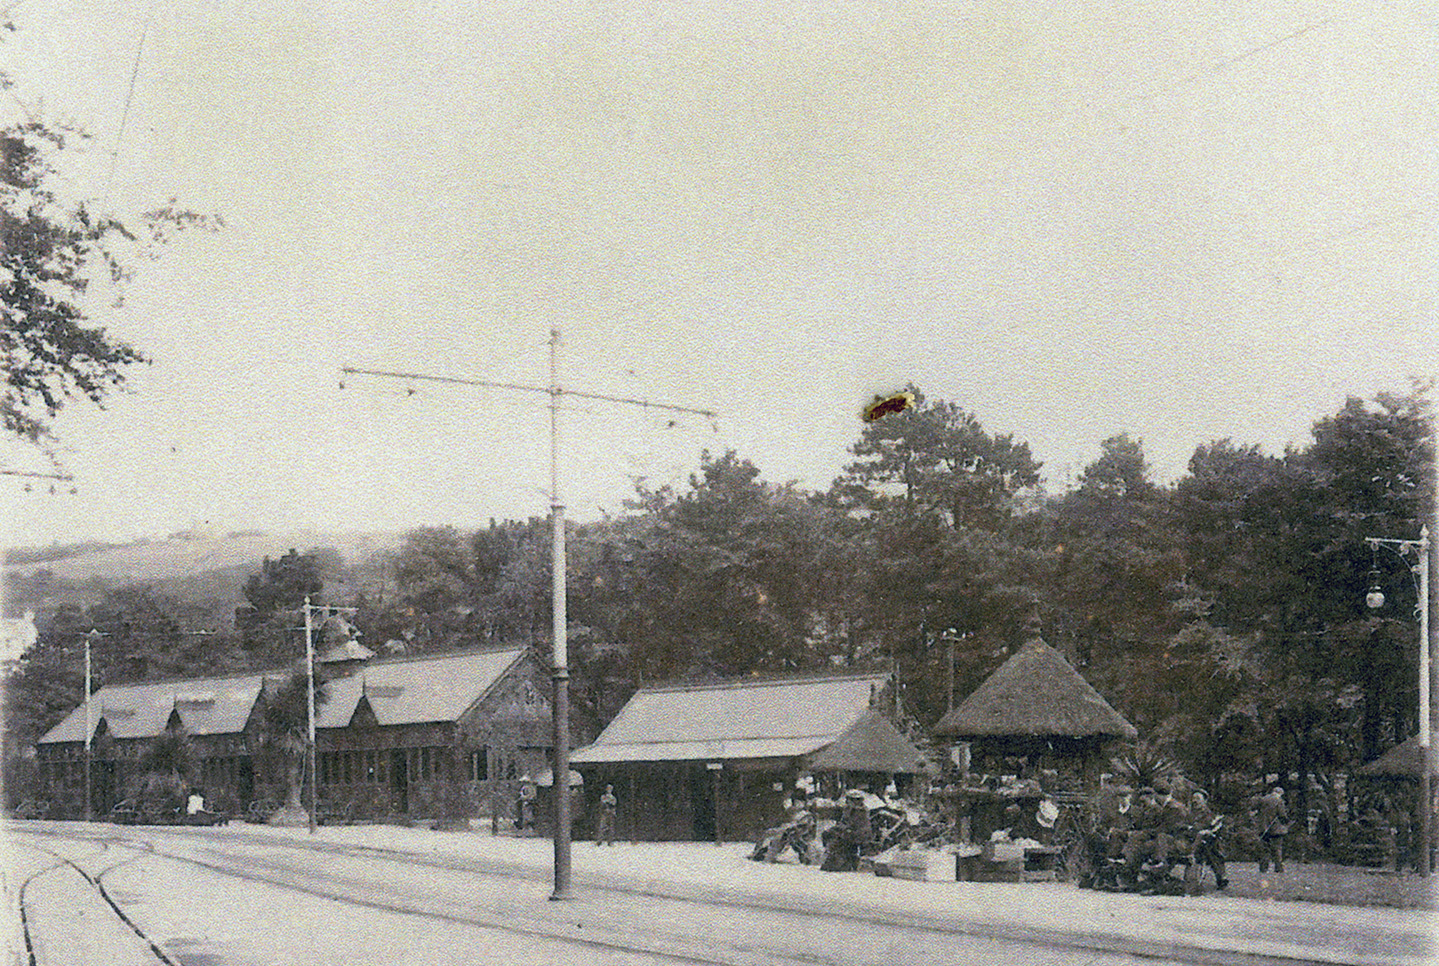 Laxey Tram Station